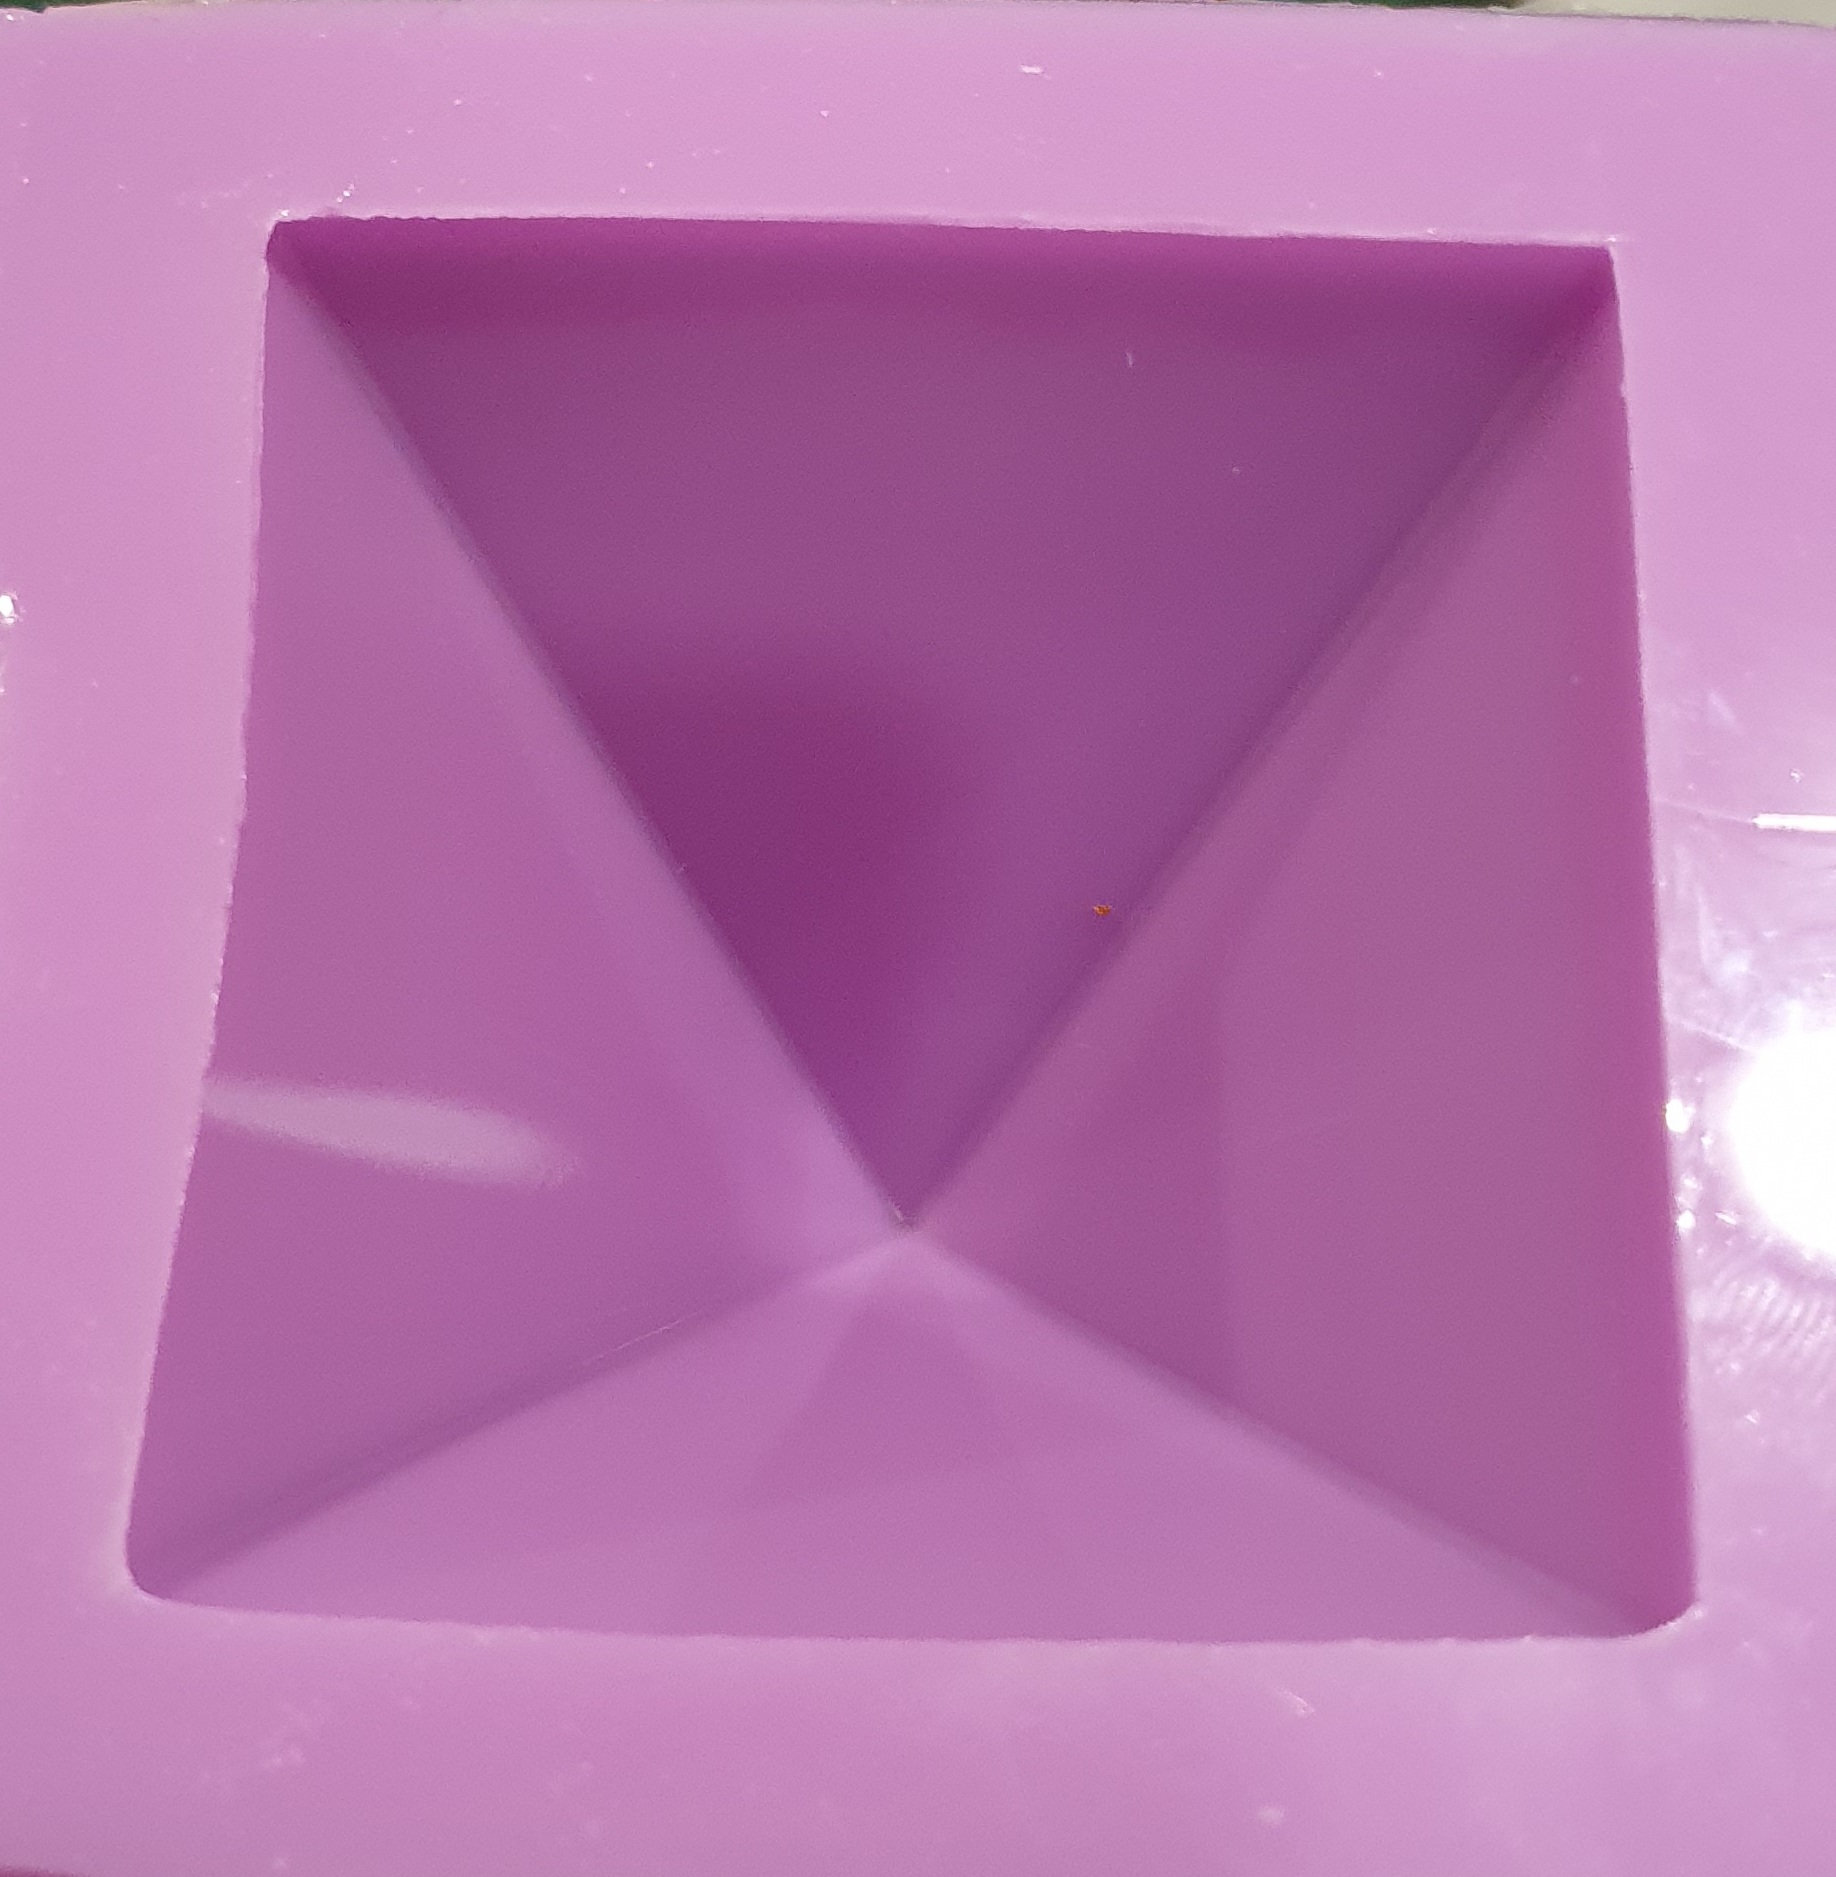 Pyramid Silicone Molds Set, Resin Soap Clay Candles Jewelry Mold